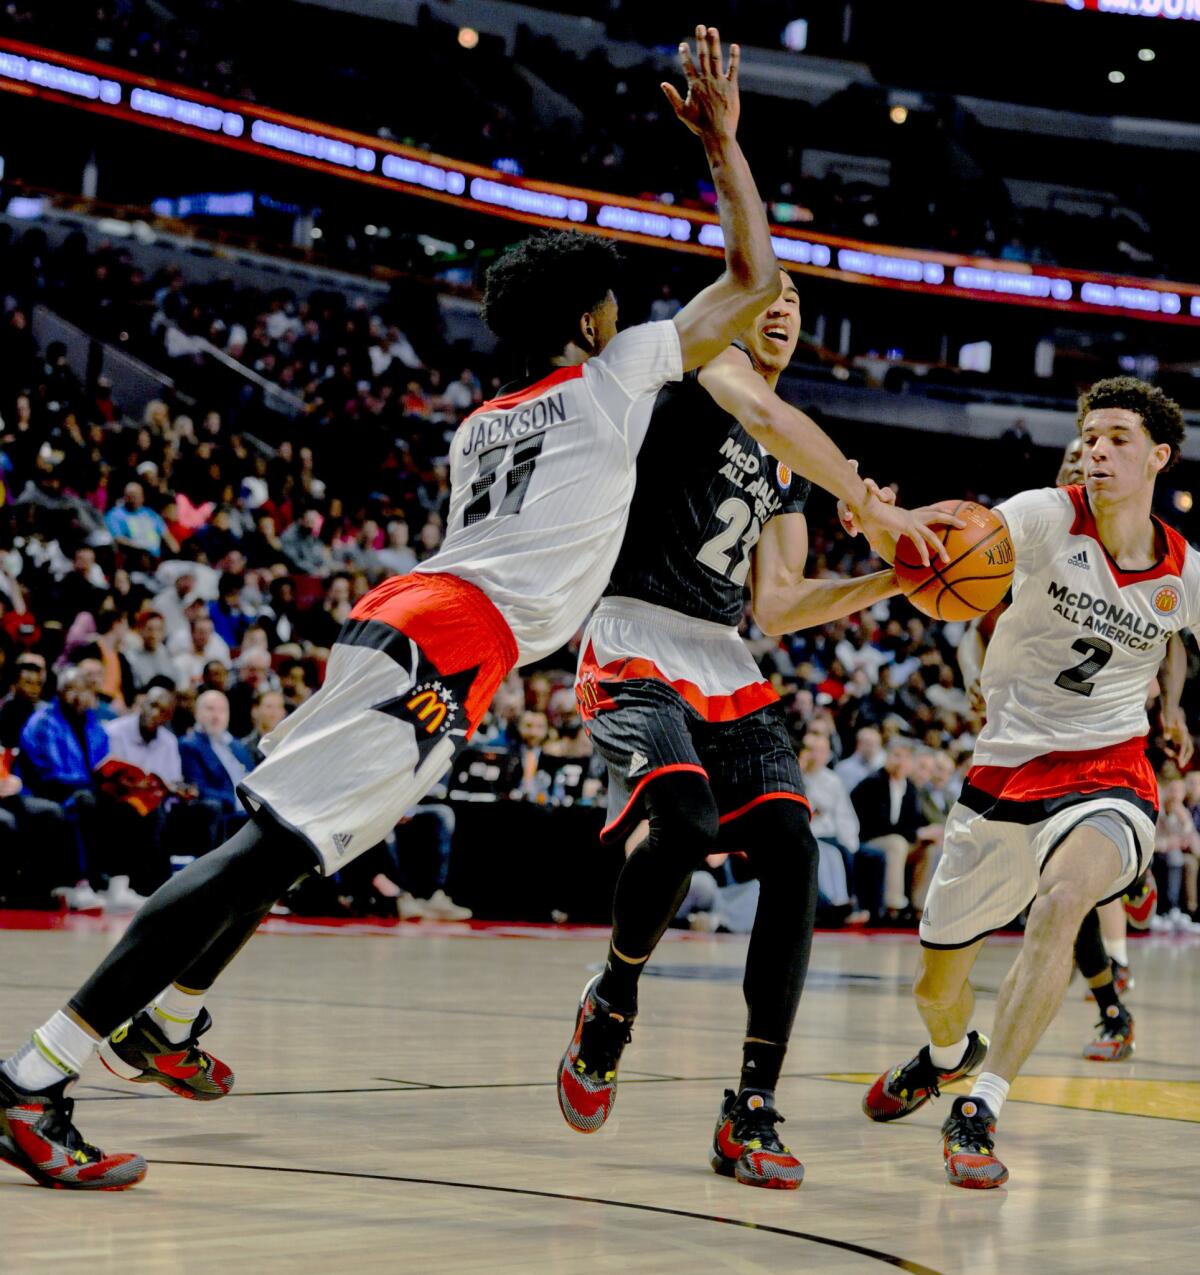 East forward Jayson Tatum (22) from Chaminade College Preparatory school in St. Louis, shoots against West forward Josh Jackson, left, from Justin-Siena High School/Prolific Prep Academy in Napa, Calif., and West point guard Lonzo Ball from Chino Hills High School during the McDonald's All-American game in Chicago.